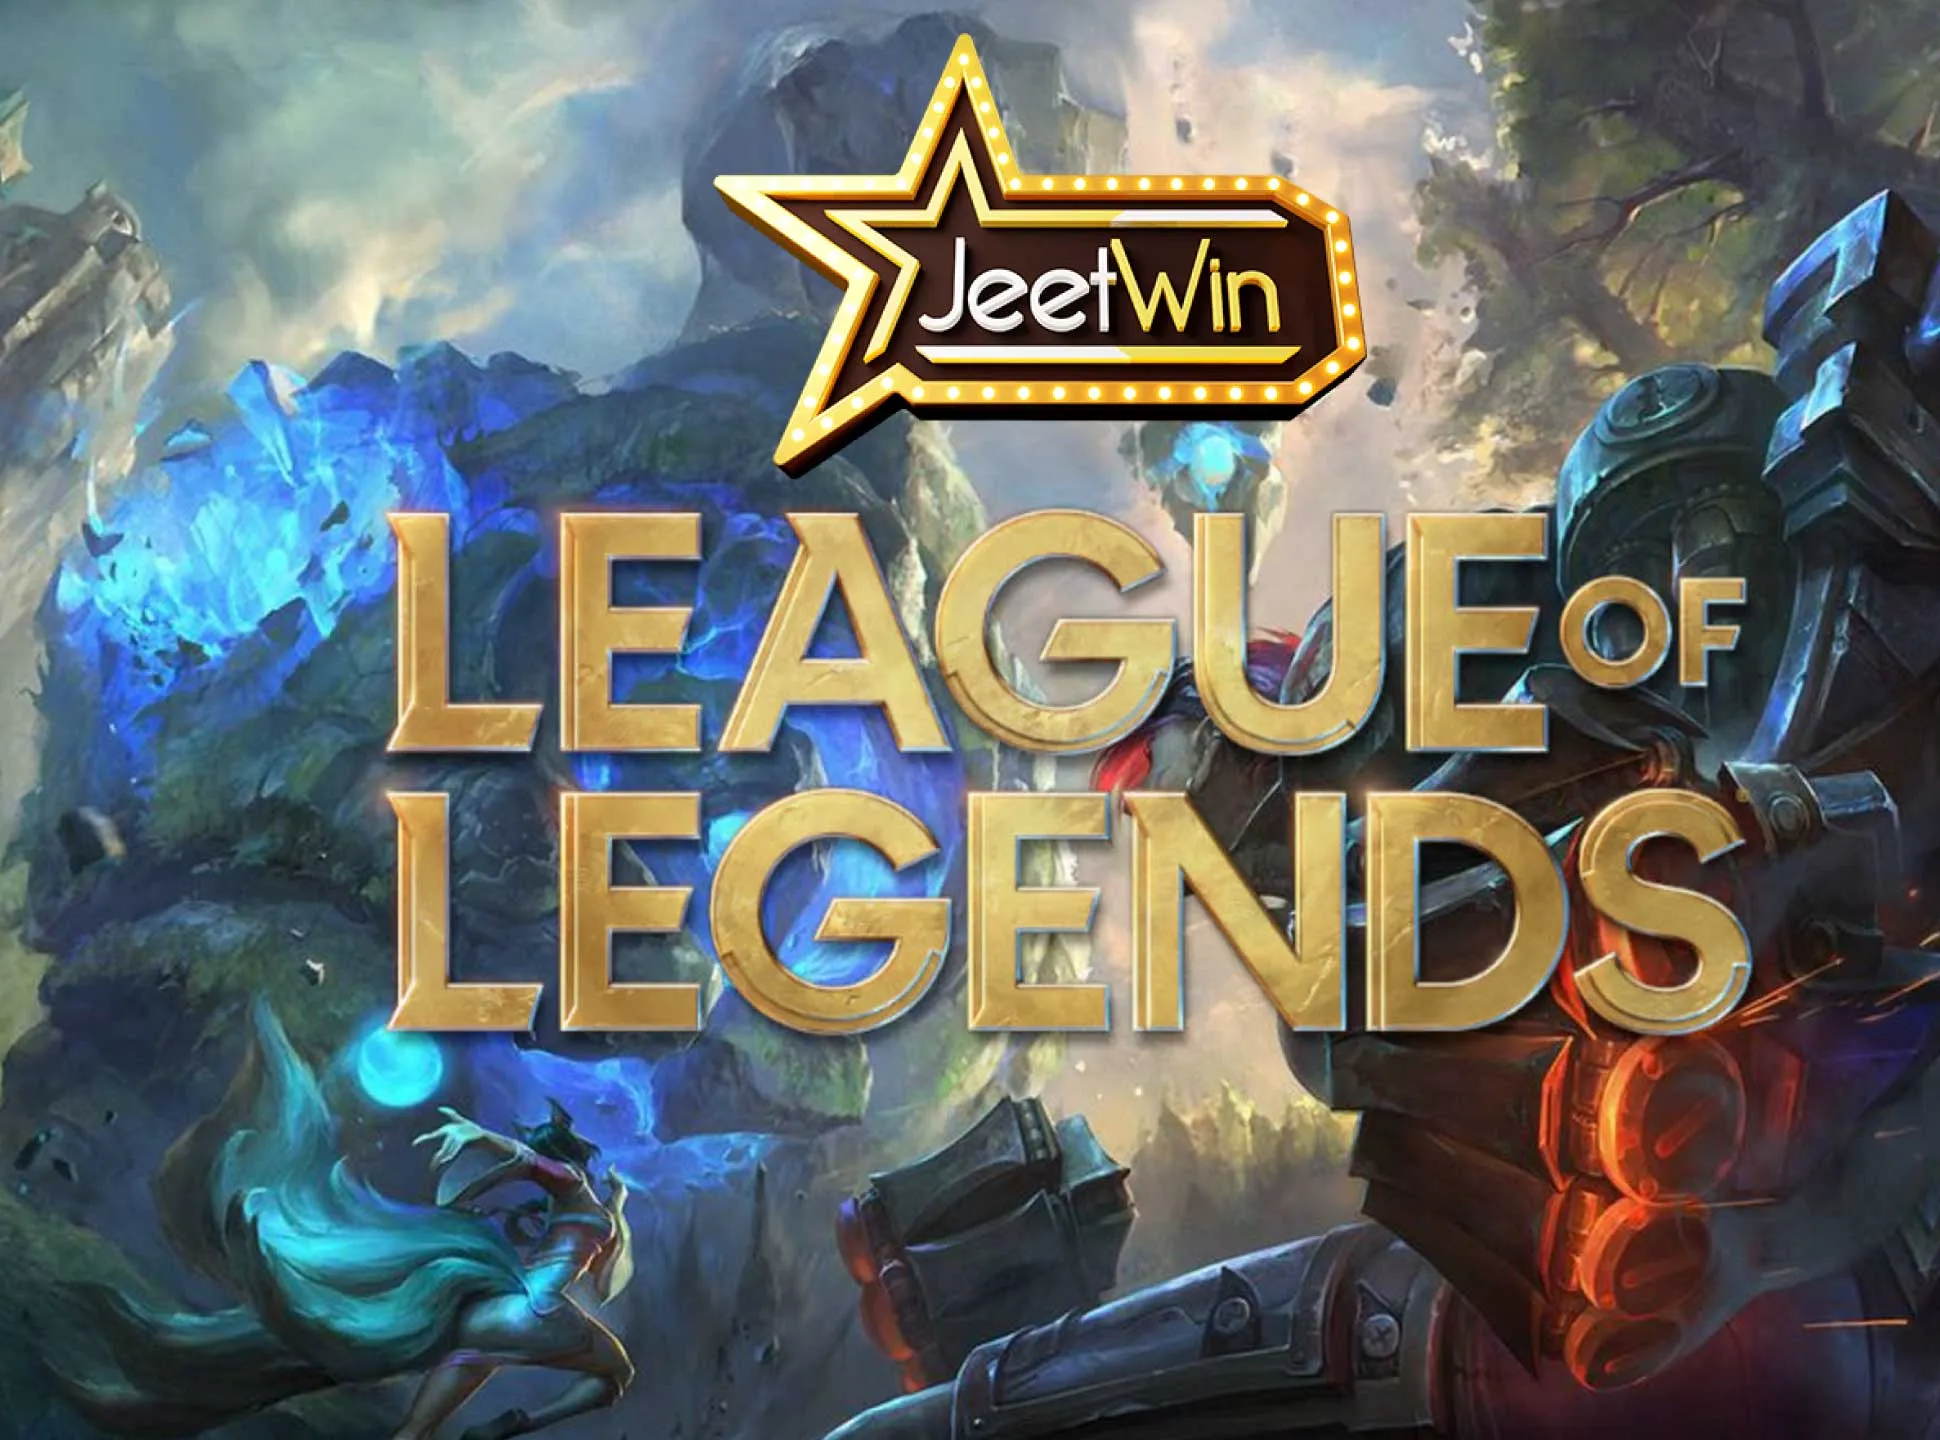 Watch the LOL streamings on Jeetwin and place bets on it.